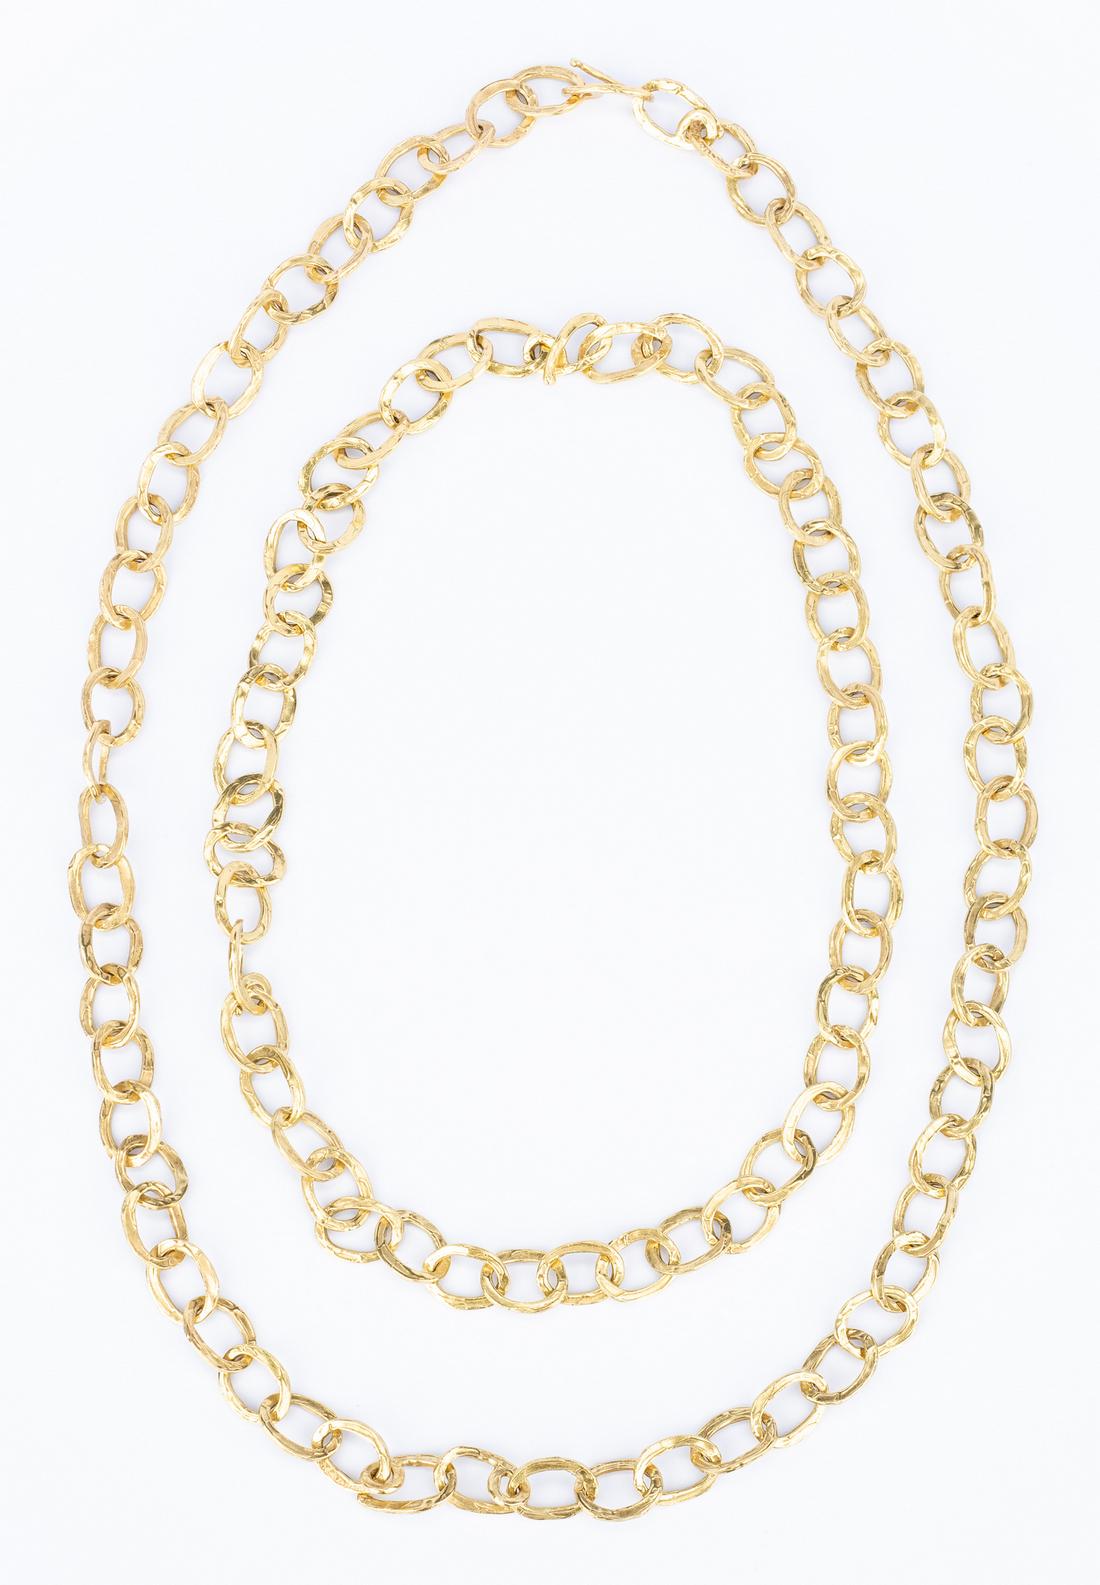 18k Gold Chain Necklace Set, 240 grams - Image 6 of 10